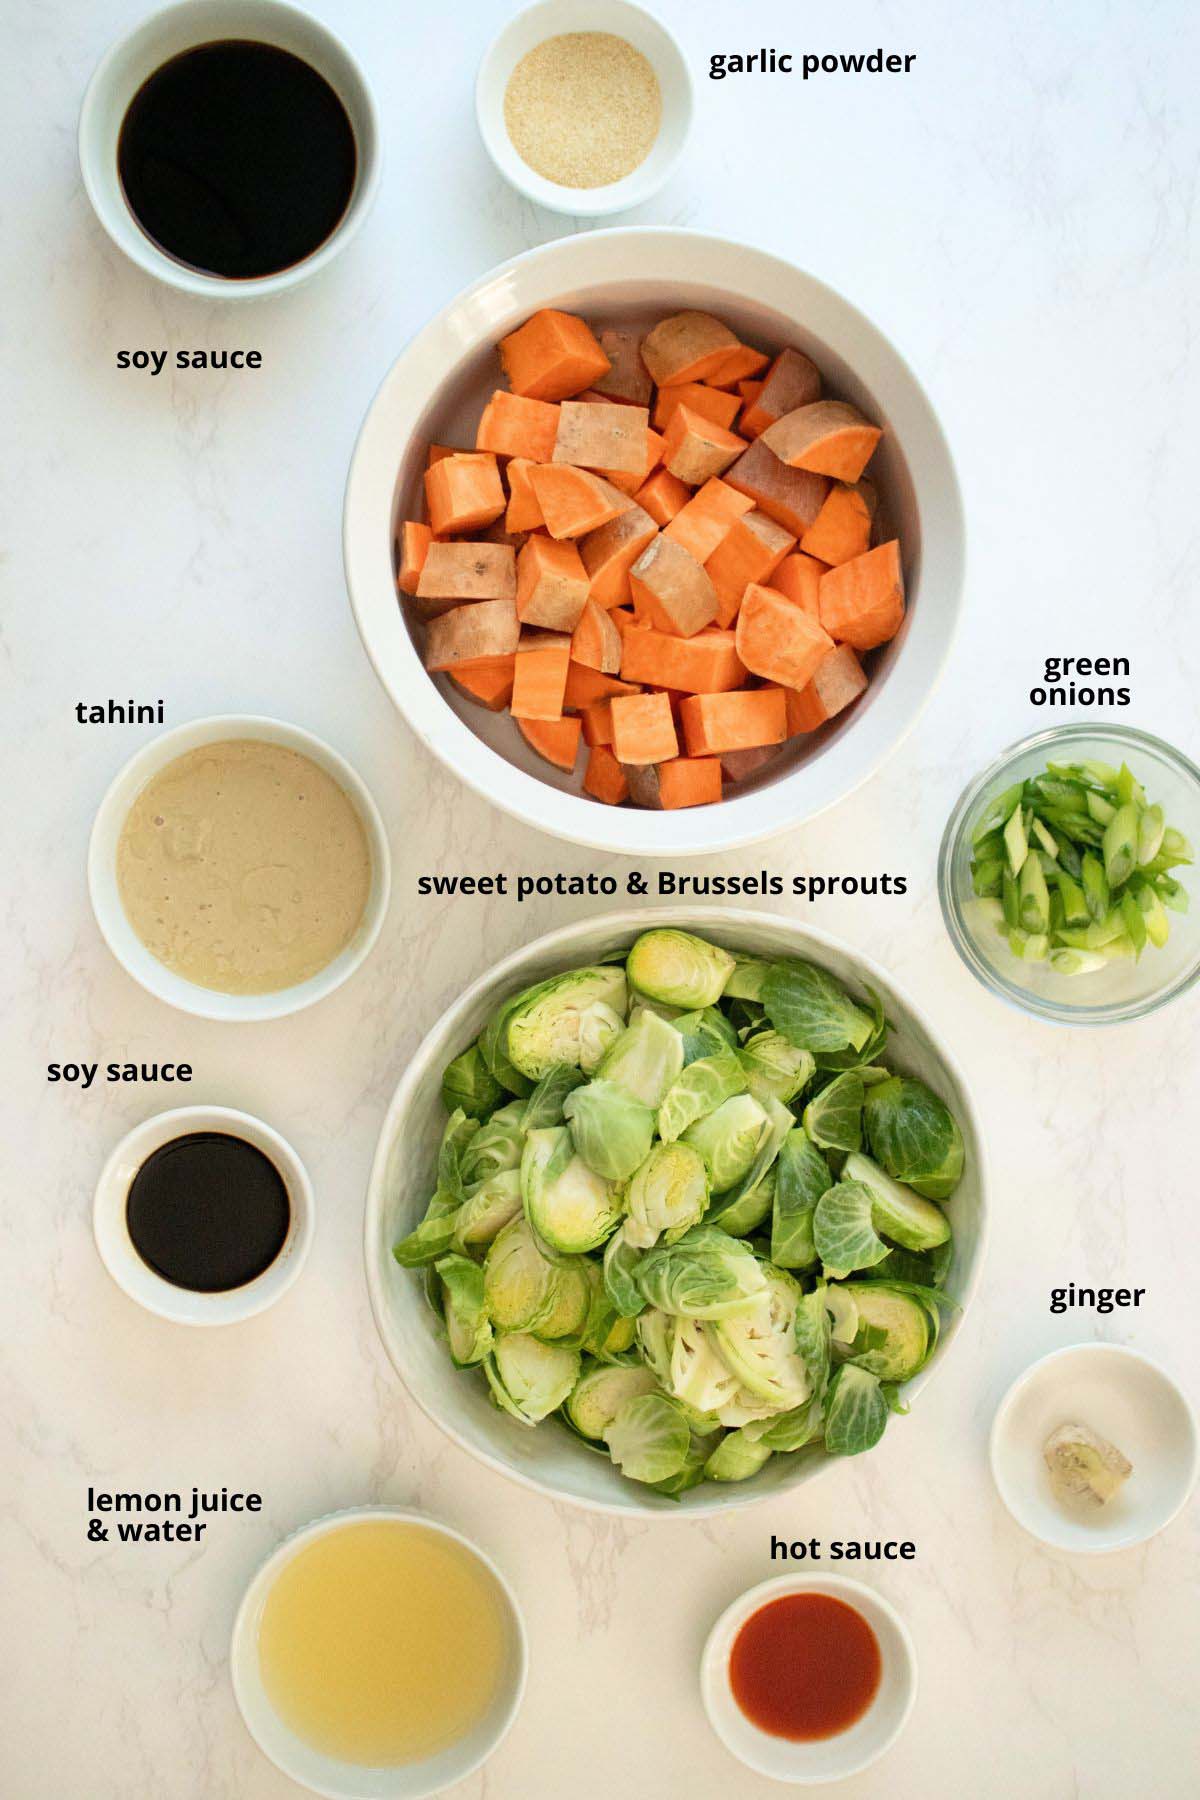 sweet potatoes, Brussels sprouts, and other meal prep ingredients in bowls on a white table